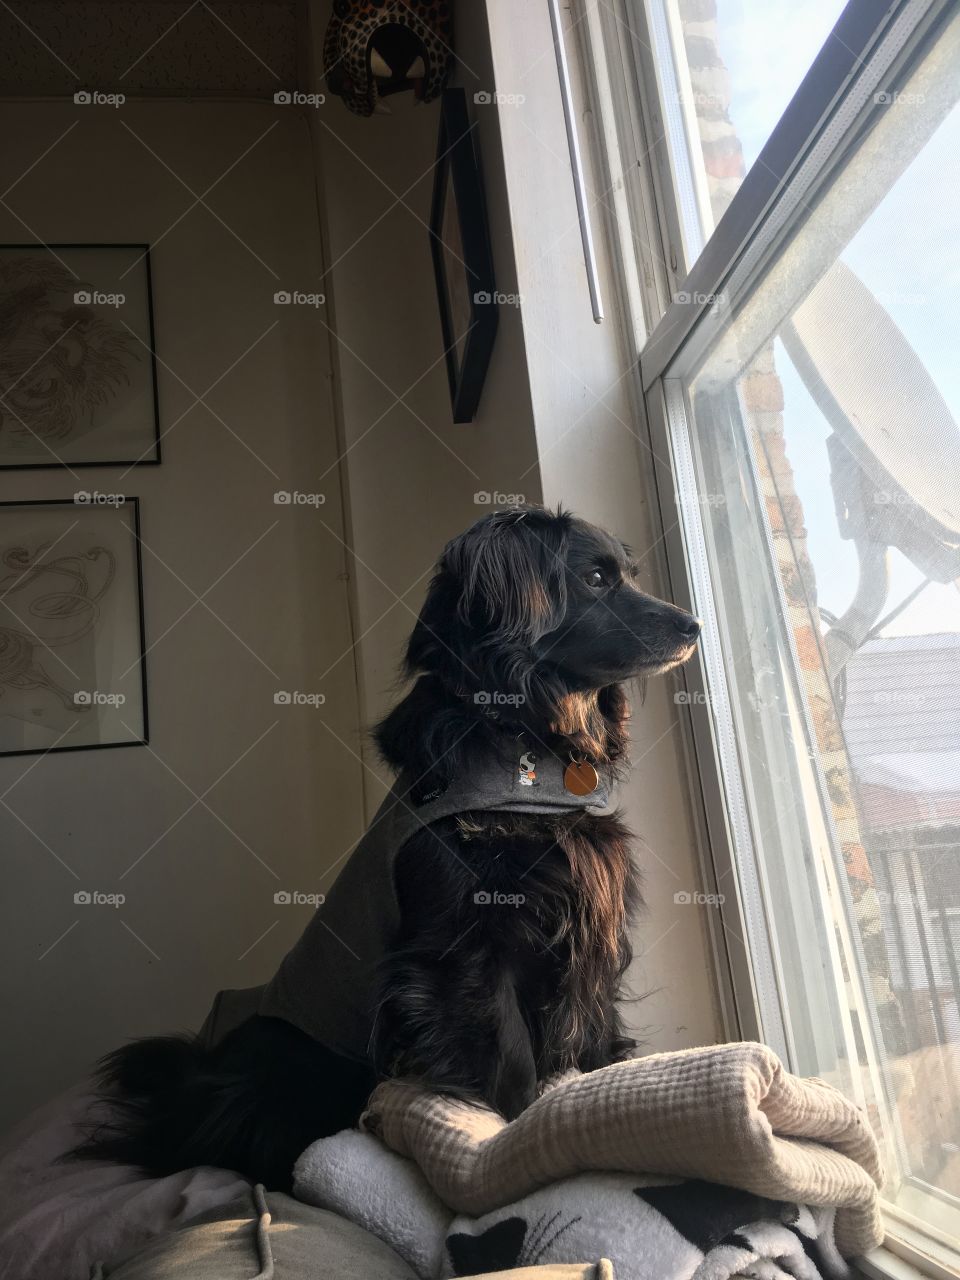 Watching the world go by 